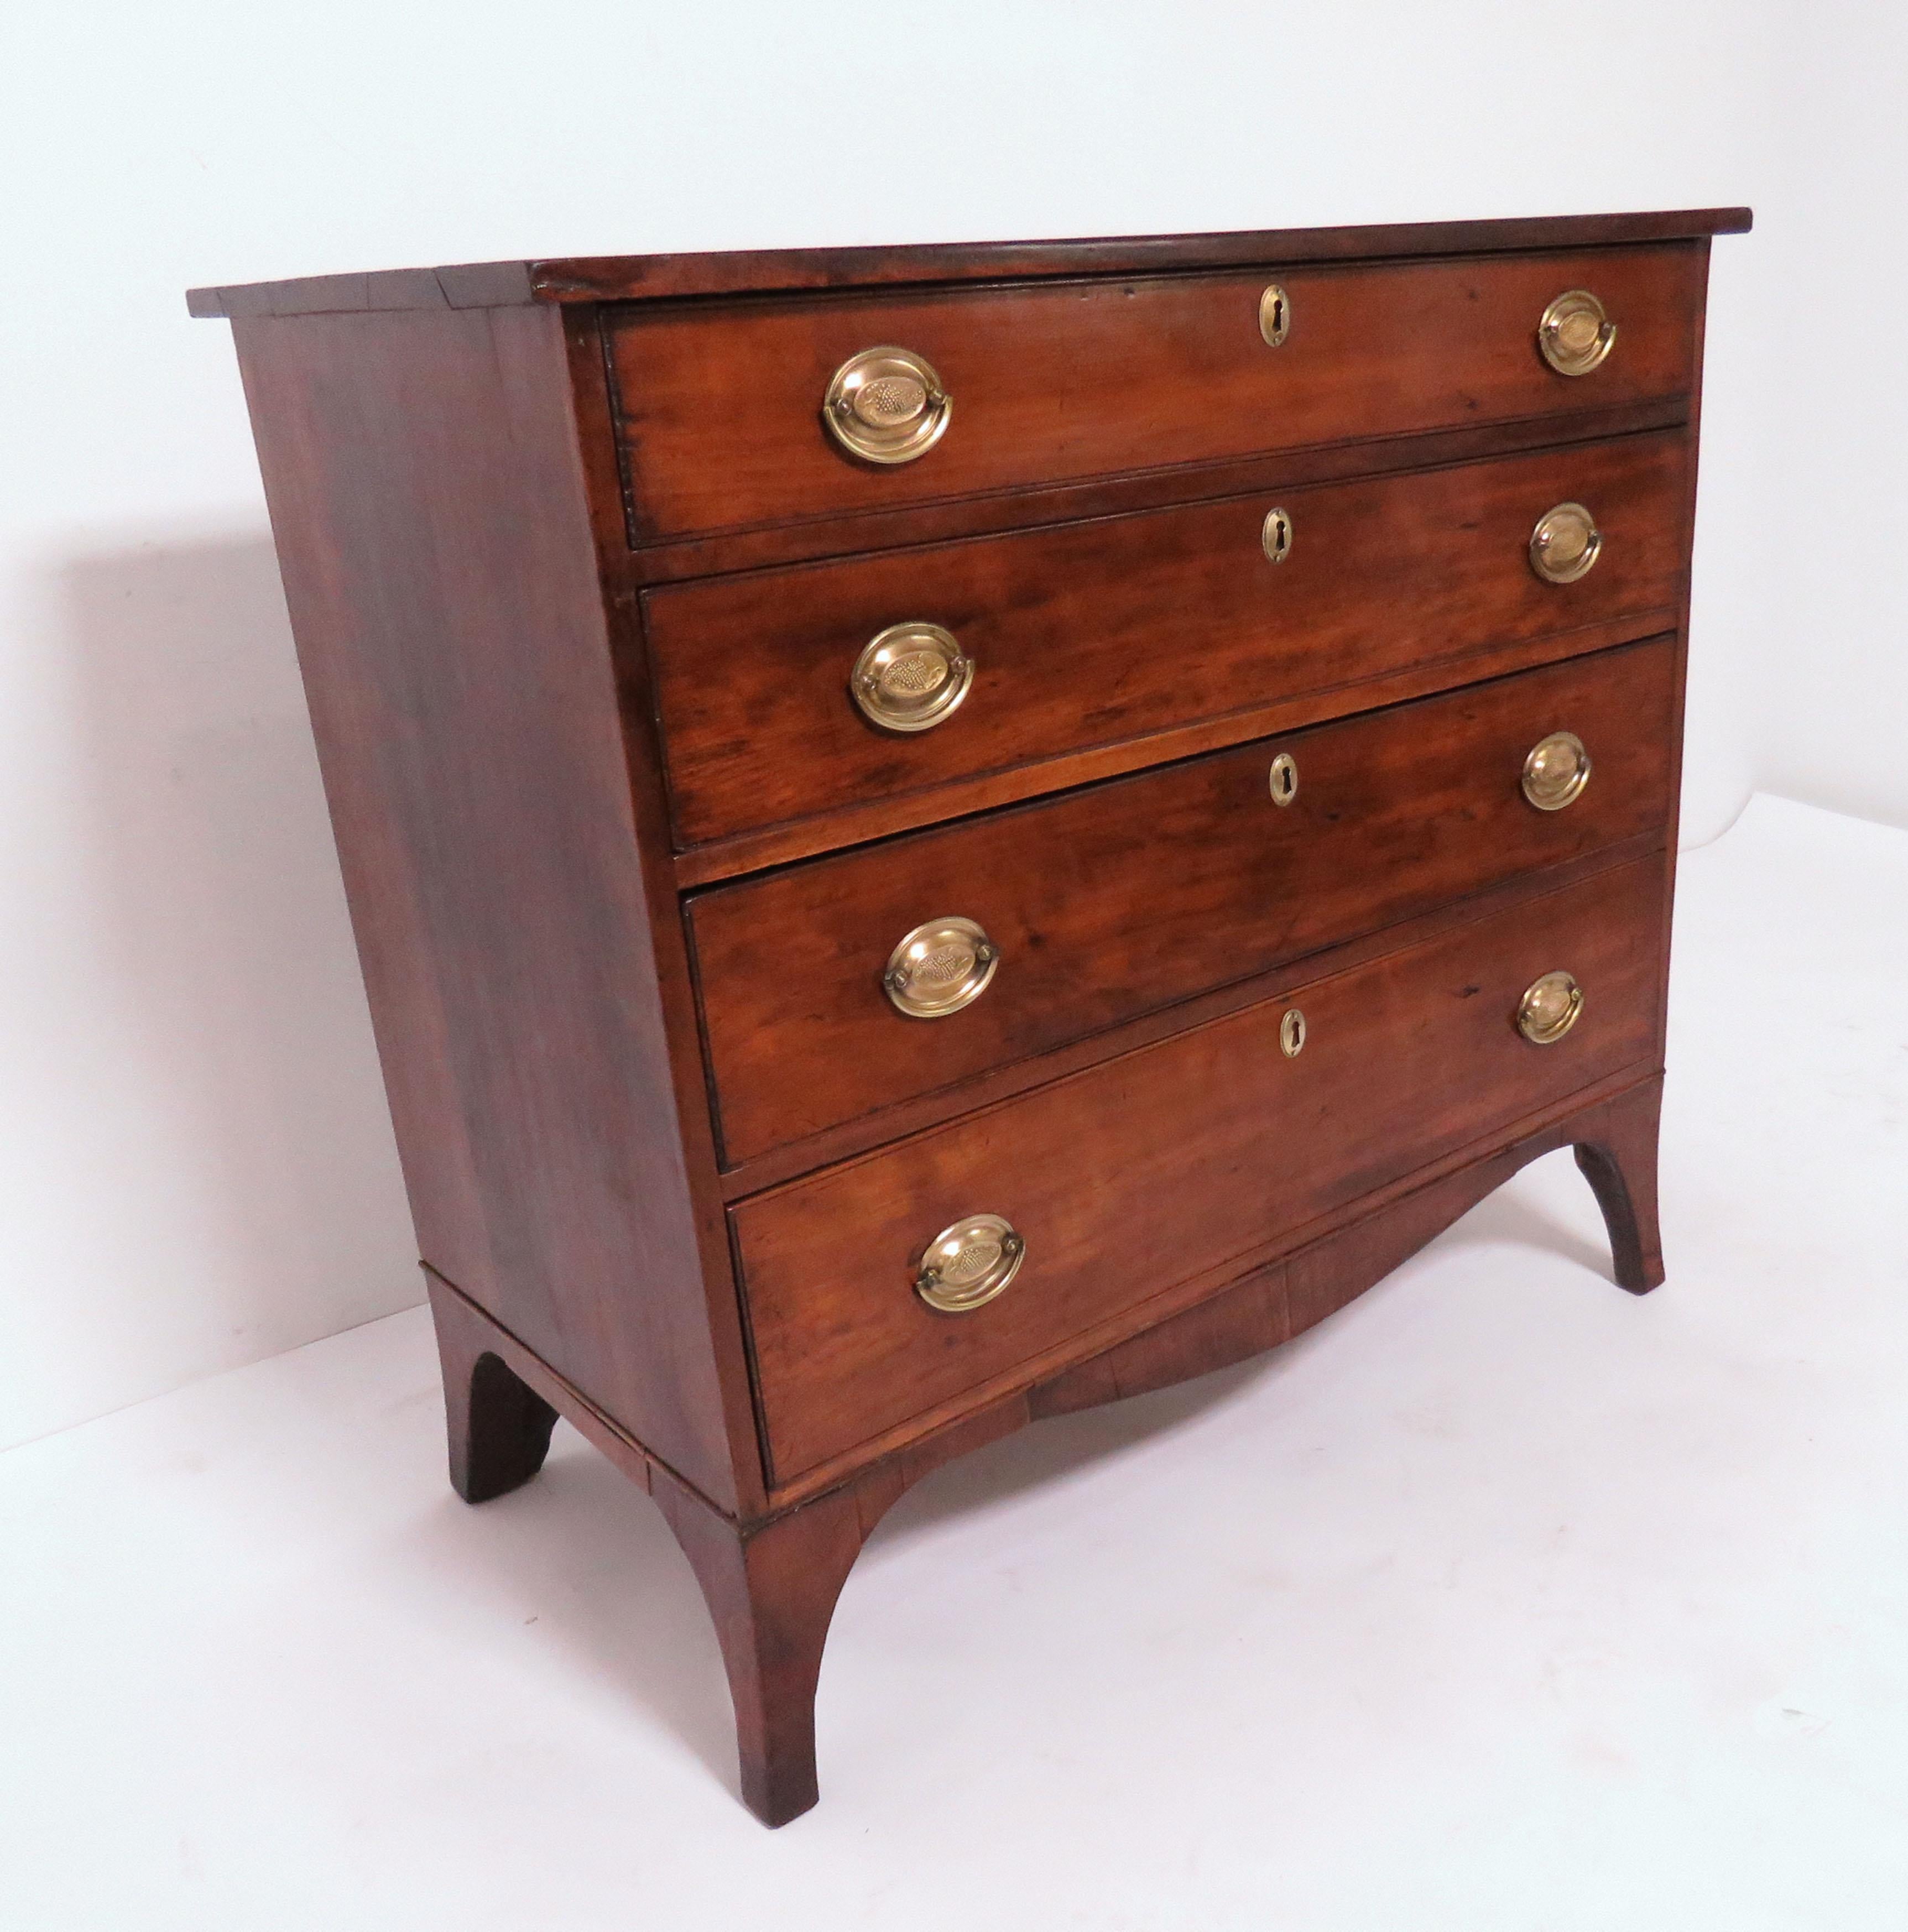 A late 18th century American Federal period, Hepplewhite chest of drawers in cherry and mahogany with splayed (French) bracket feet and original English brasses, from a New Hampshire estate.